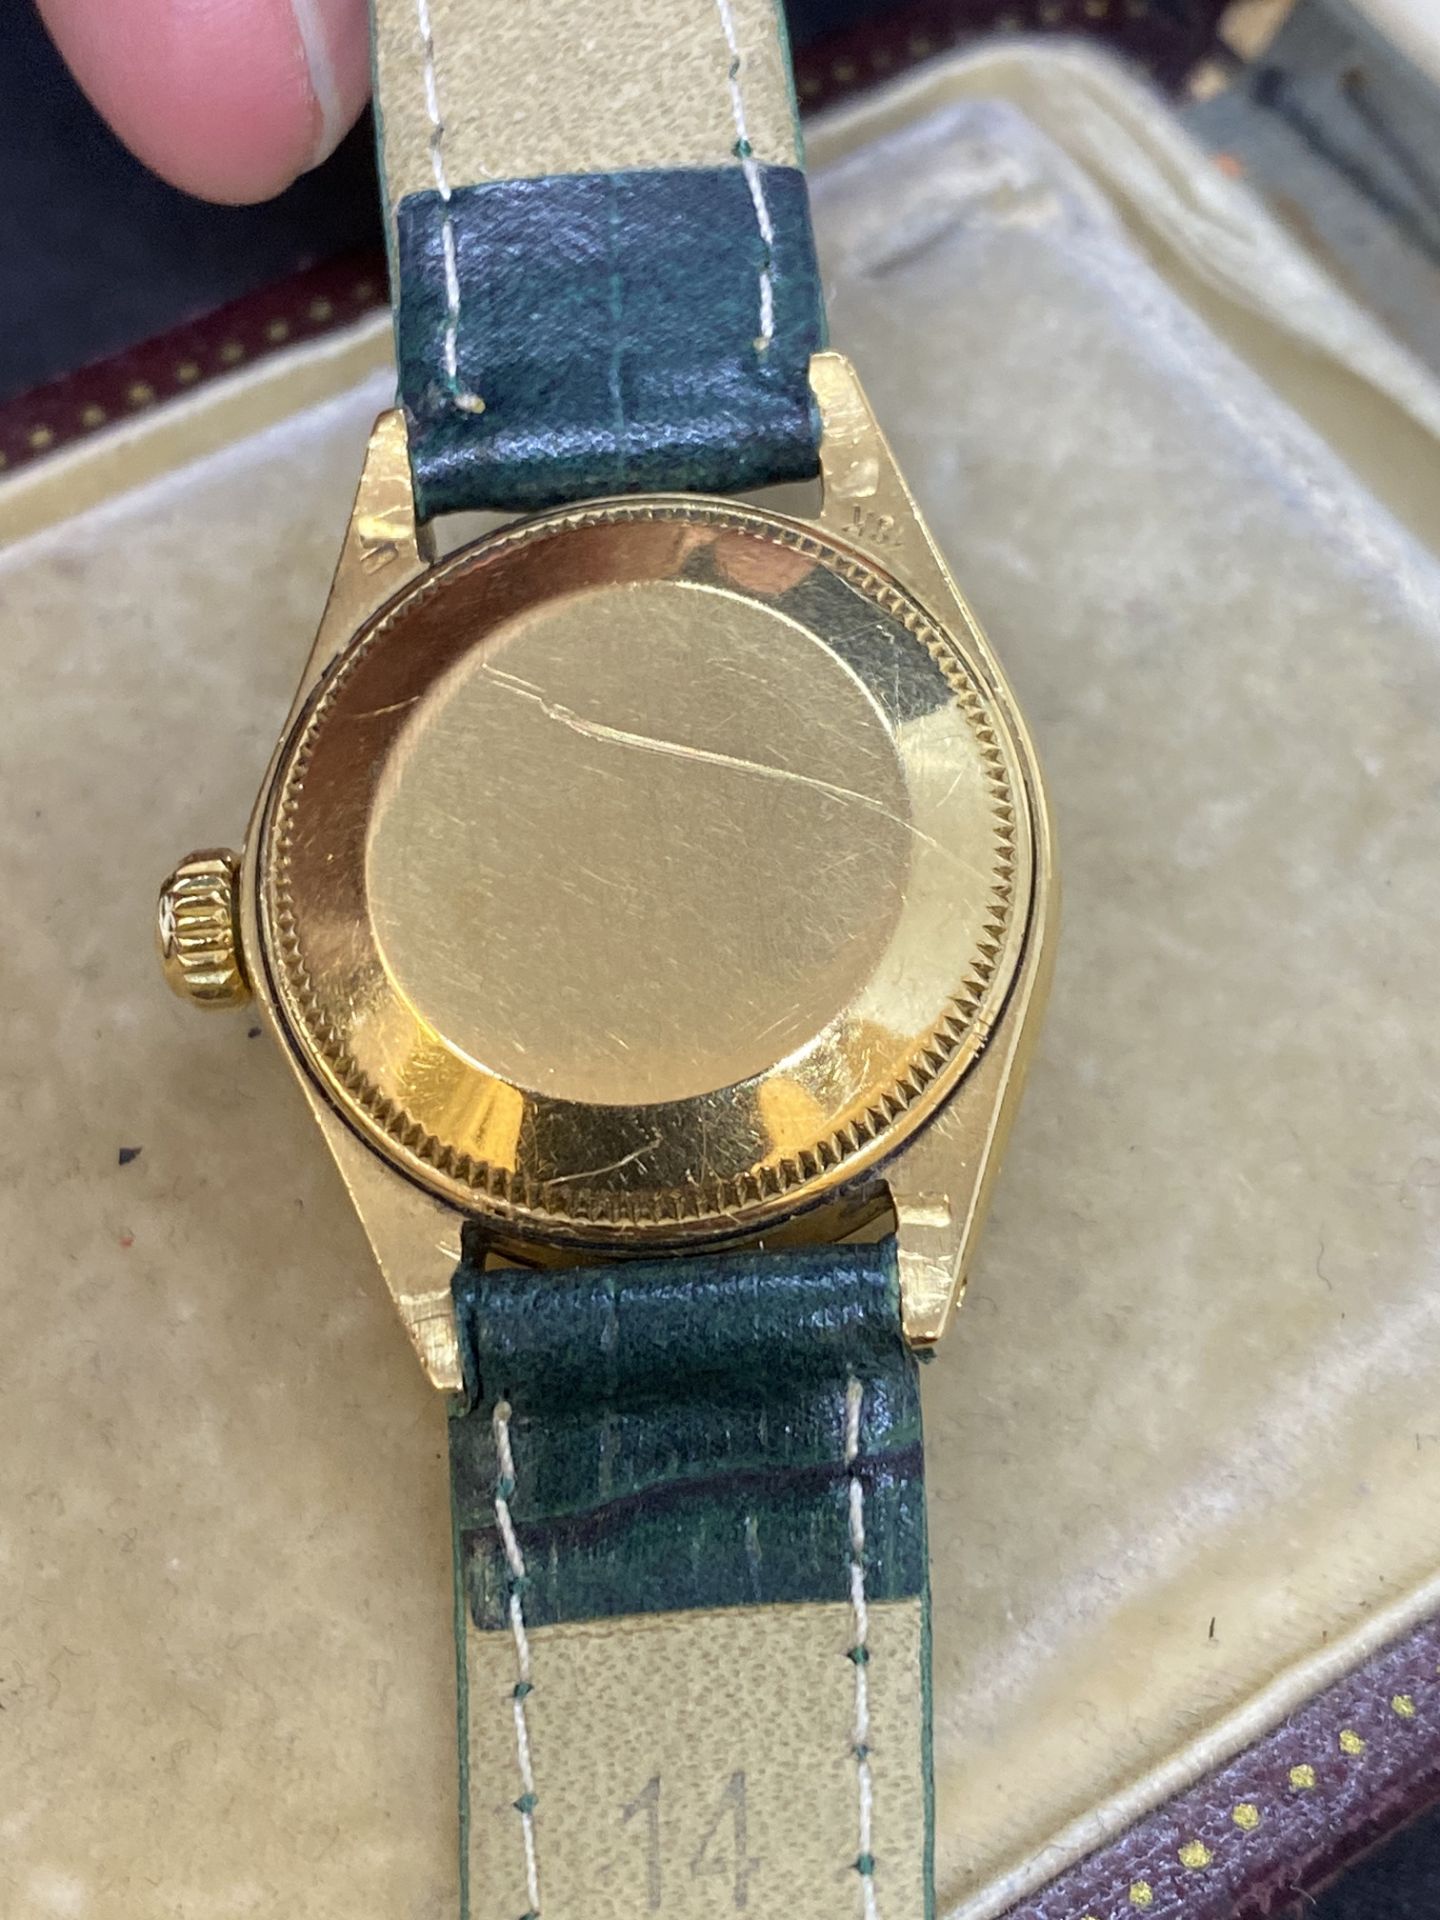 18ct GOLD ROLEX WATCH ON LEATHER STRAP - Image 2 of 8